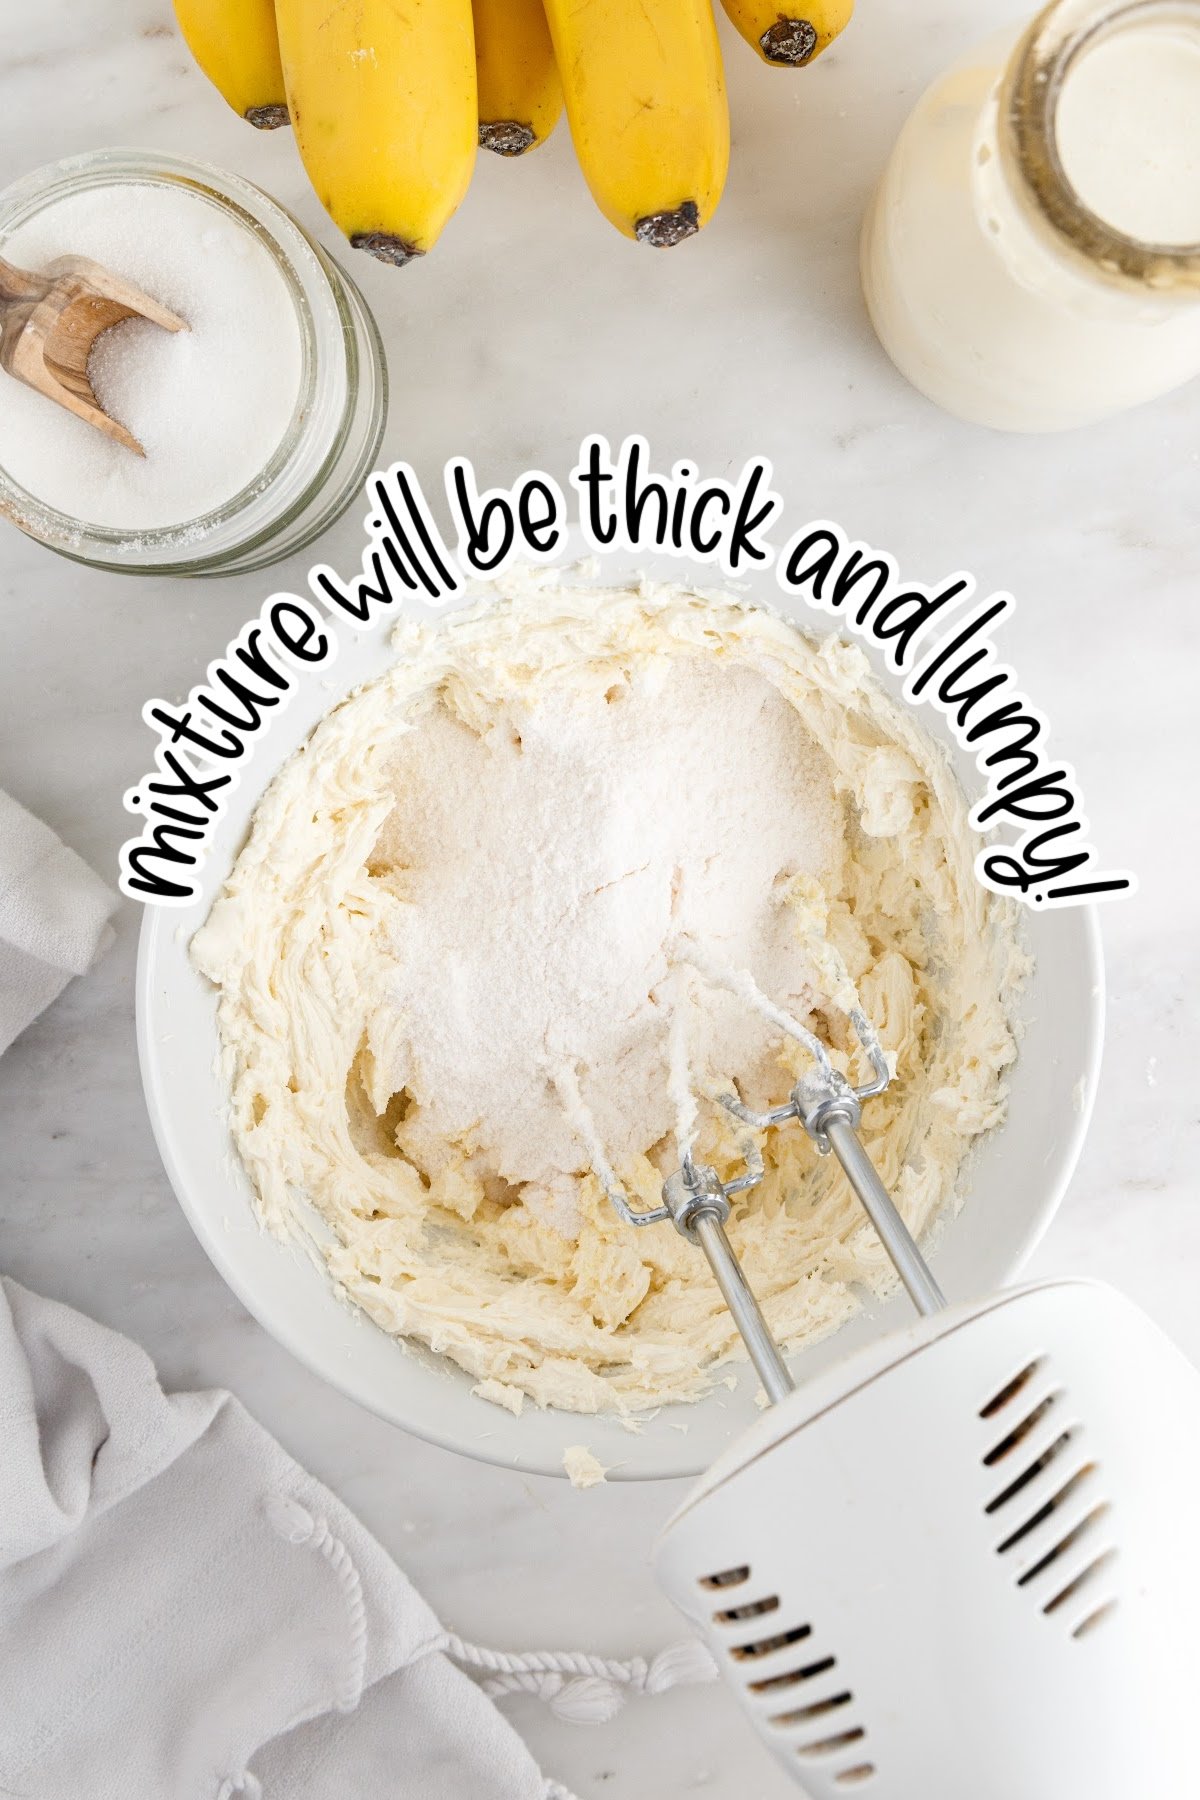 Adding pudding powder to the banana cream cheesecake mixture in mixing bowl with hand beater and text overlay "mixture will be thick and lumpy."